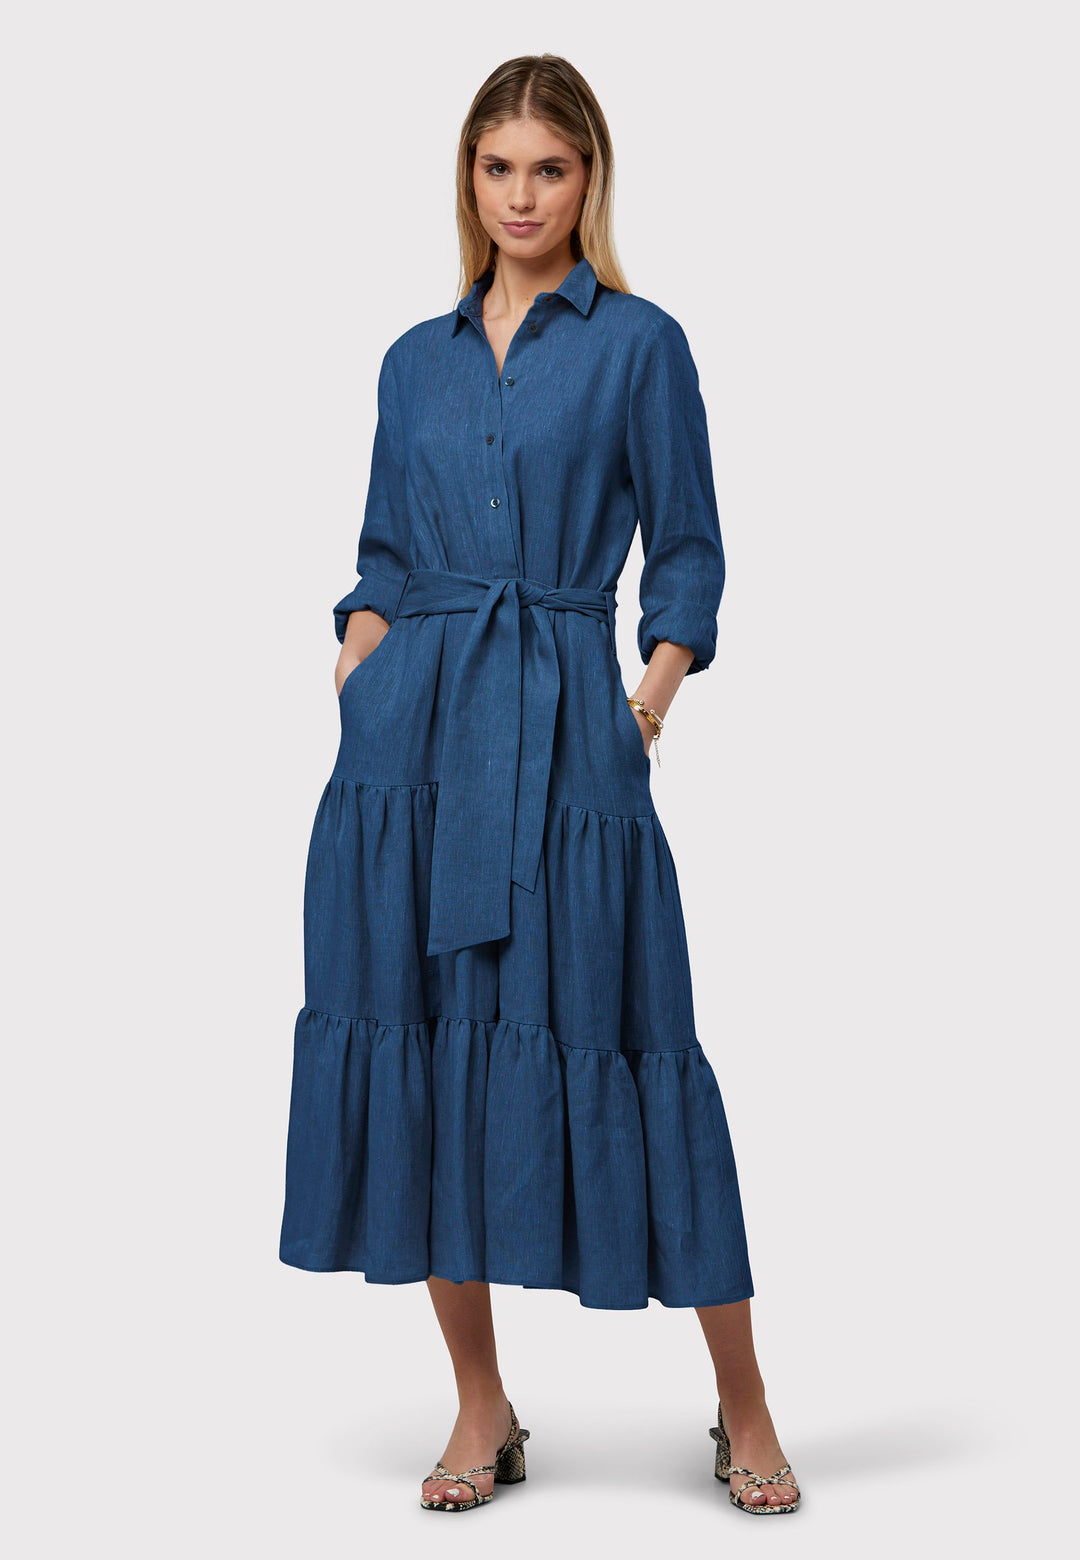 Adele Borage Blue Dress, crafted in a rich borage blue linen. The design showcases a classic shirt collar and a buttoned finish at the waist, ensuring a flattering silhouette that accentuates the hips. Transitioning seamlessly into a gathered tiered skirt, it exudes feminine charm. Complete with a detachable belt, practical pockets, and standard full-length shirt sleeves, this dress is versatile and perfect for any occasion.